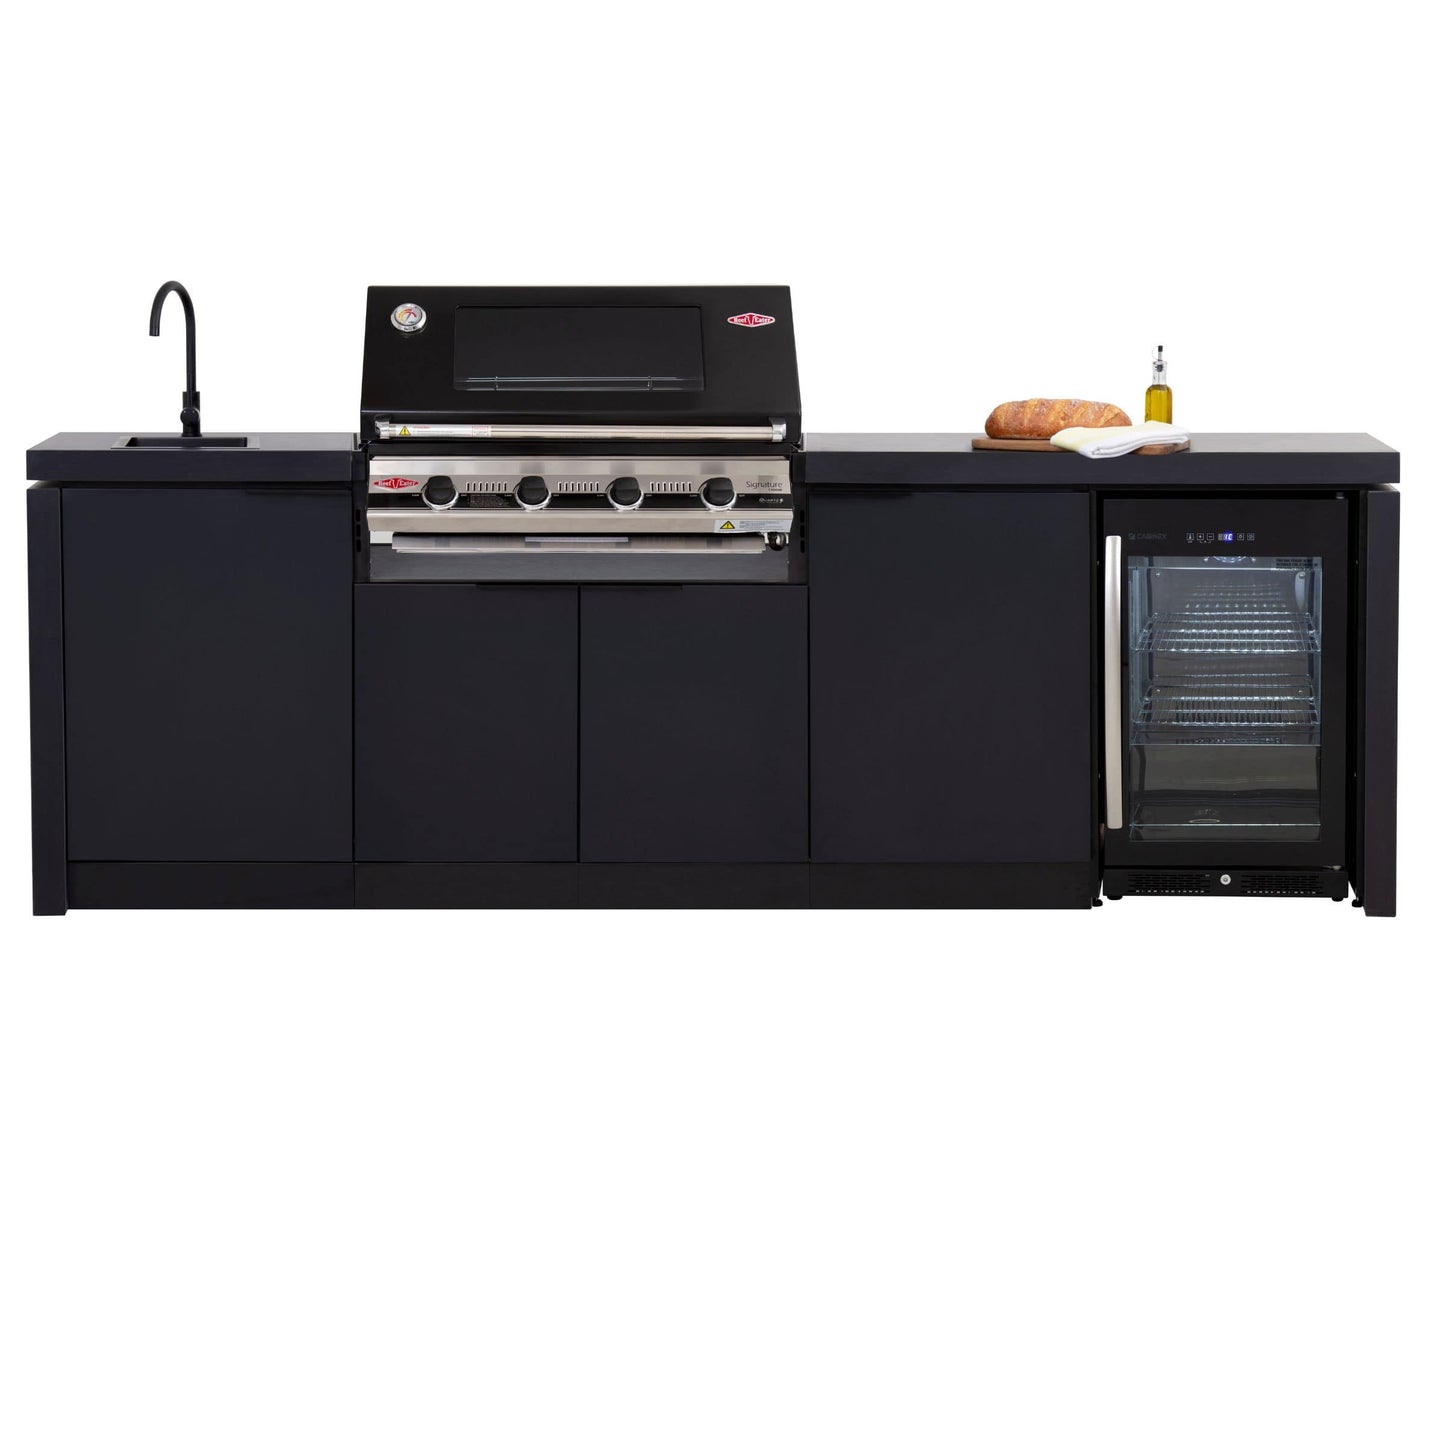 Cabinex Classic with BeefEater 4 Burner 3000E BBQ with fridge